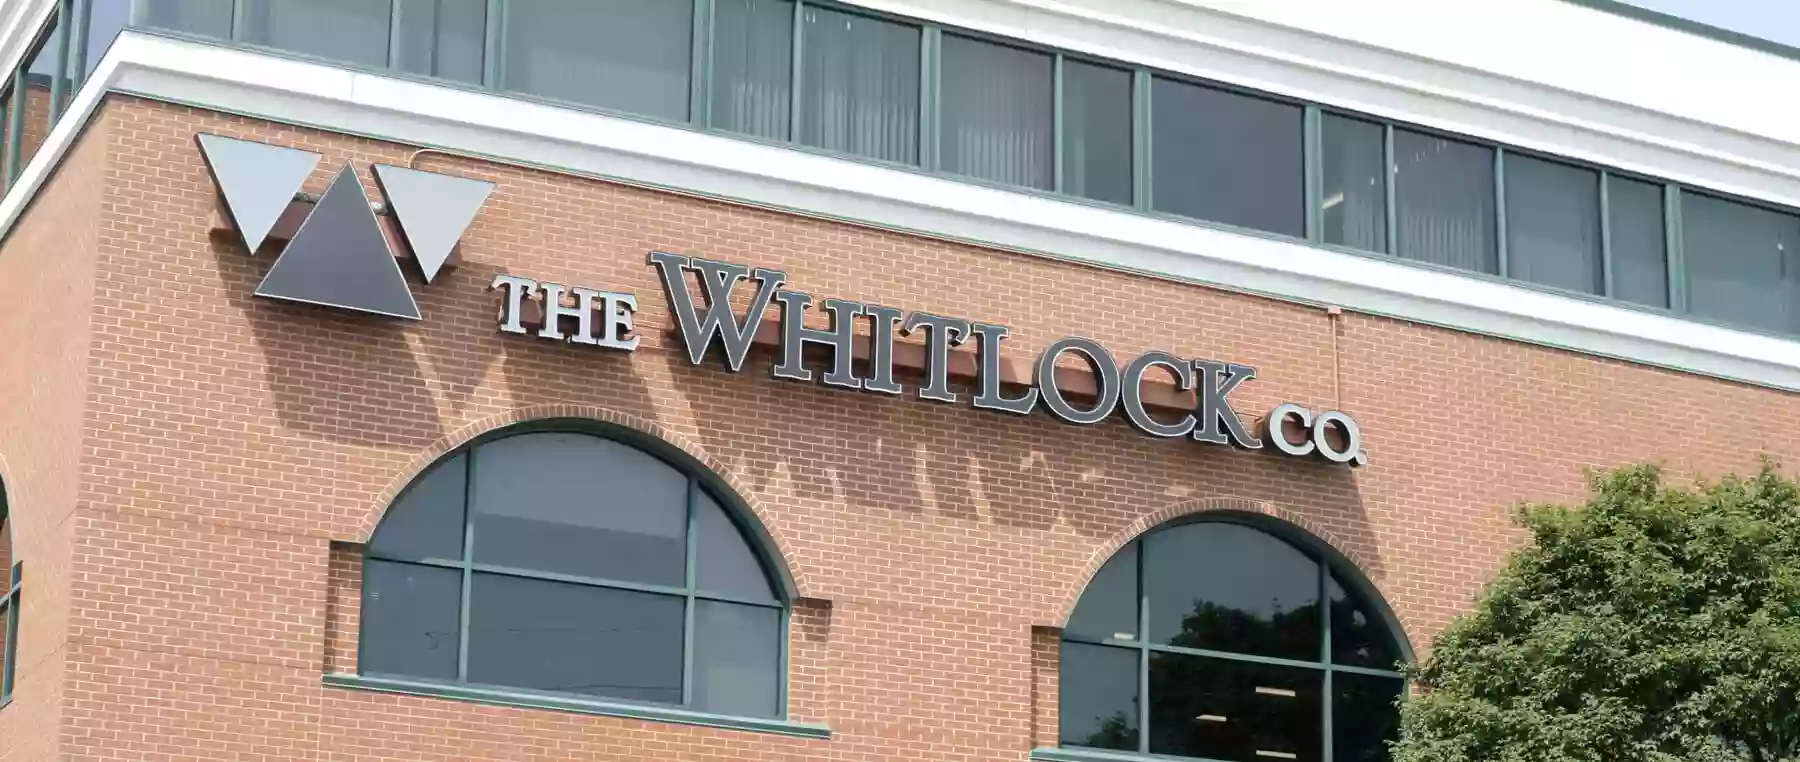 The Whitlock Co.